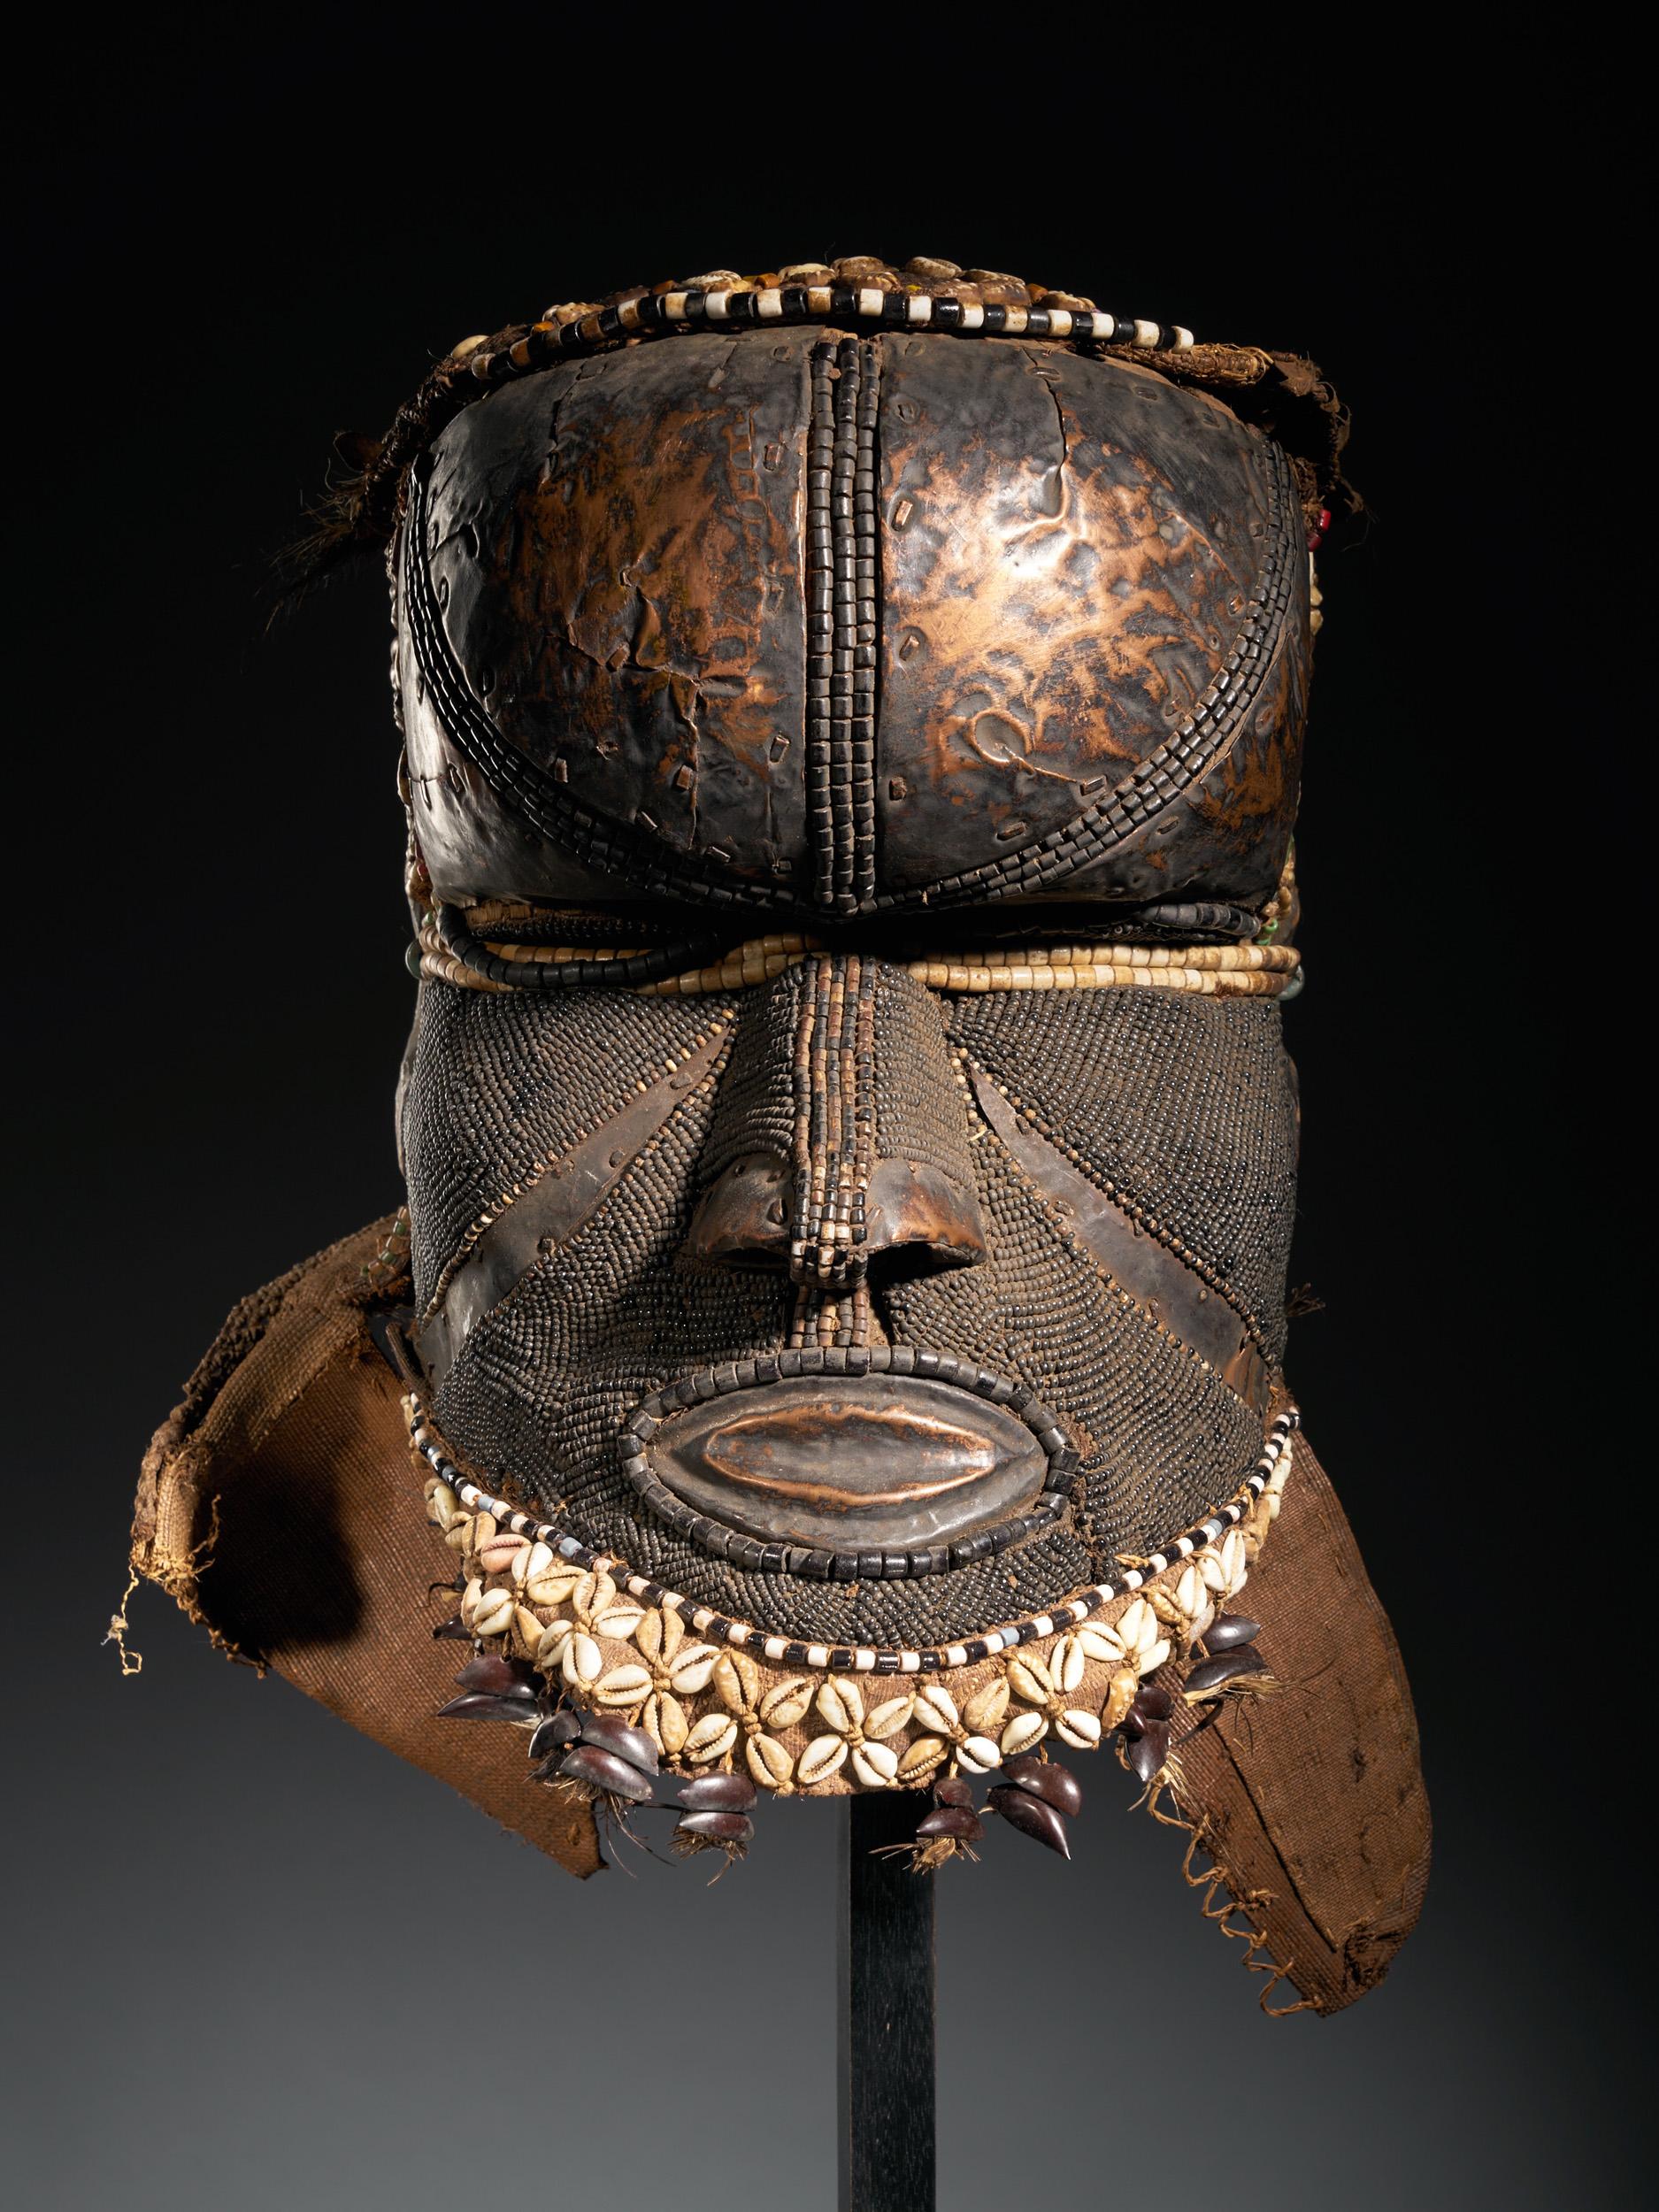 Bwoon Masks belong to the three ‘royal’ masks of the Kuba (‘mwaash amboy’, tribe founder and king, ‘ngaady amwaash’, his wife and sister, as well as ‘bwoom’, the brother of the king, who envies ‘mwaash amboy’ his power and woman). ‘Bwoom’ is amongst